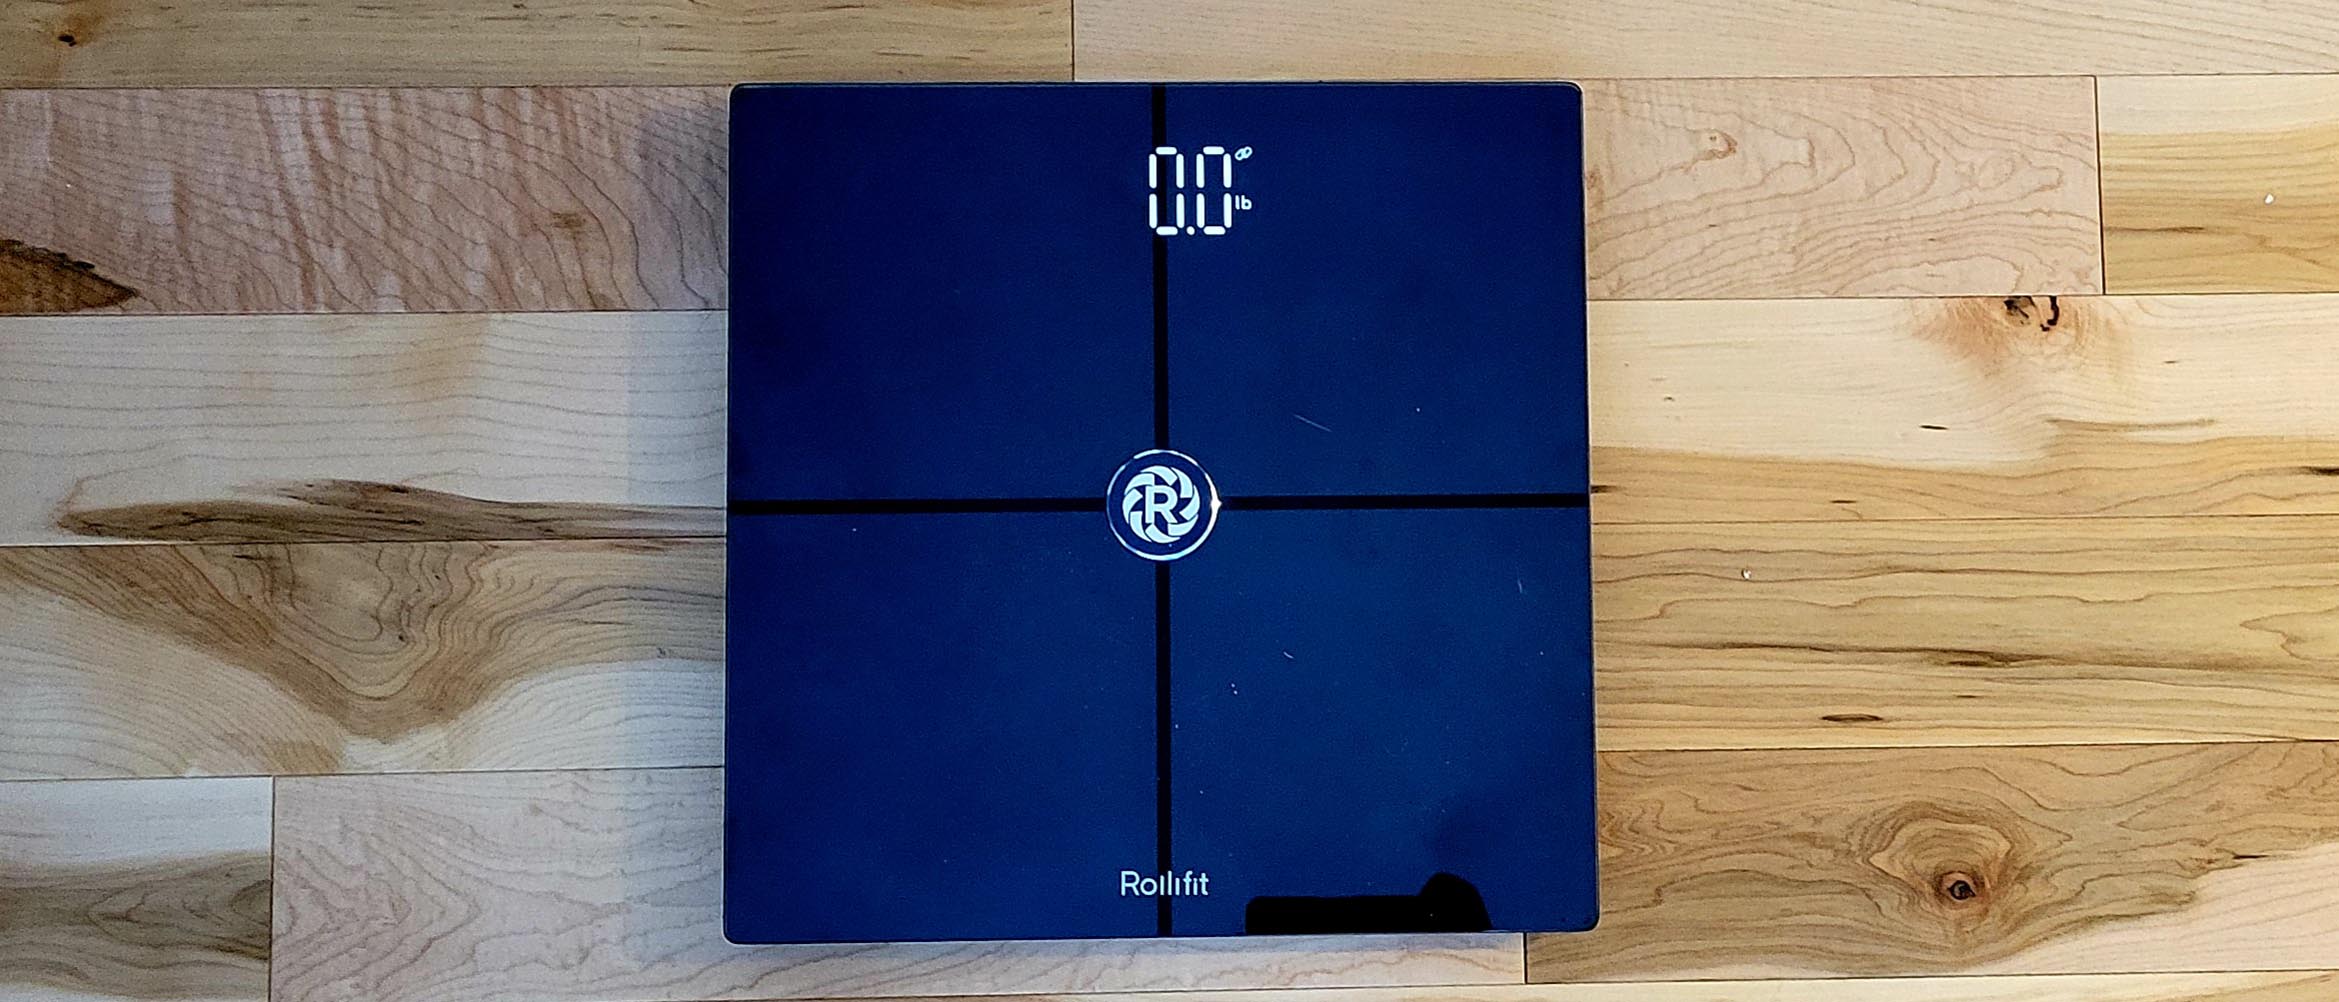 Bluetooth Body Fat Scale Review // Best Smart Scale 2019